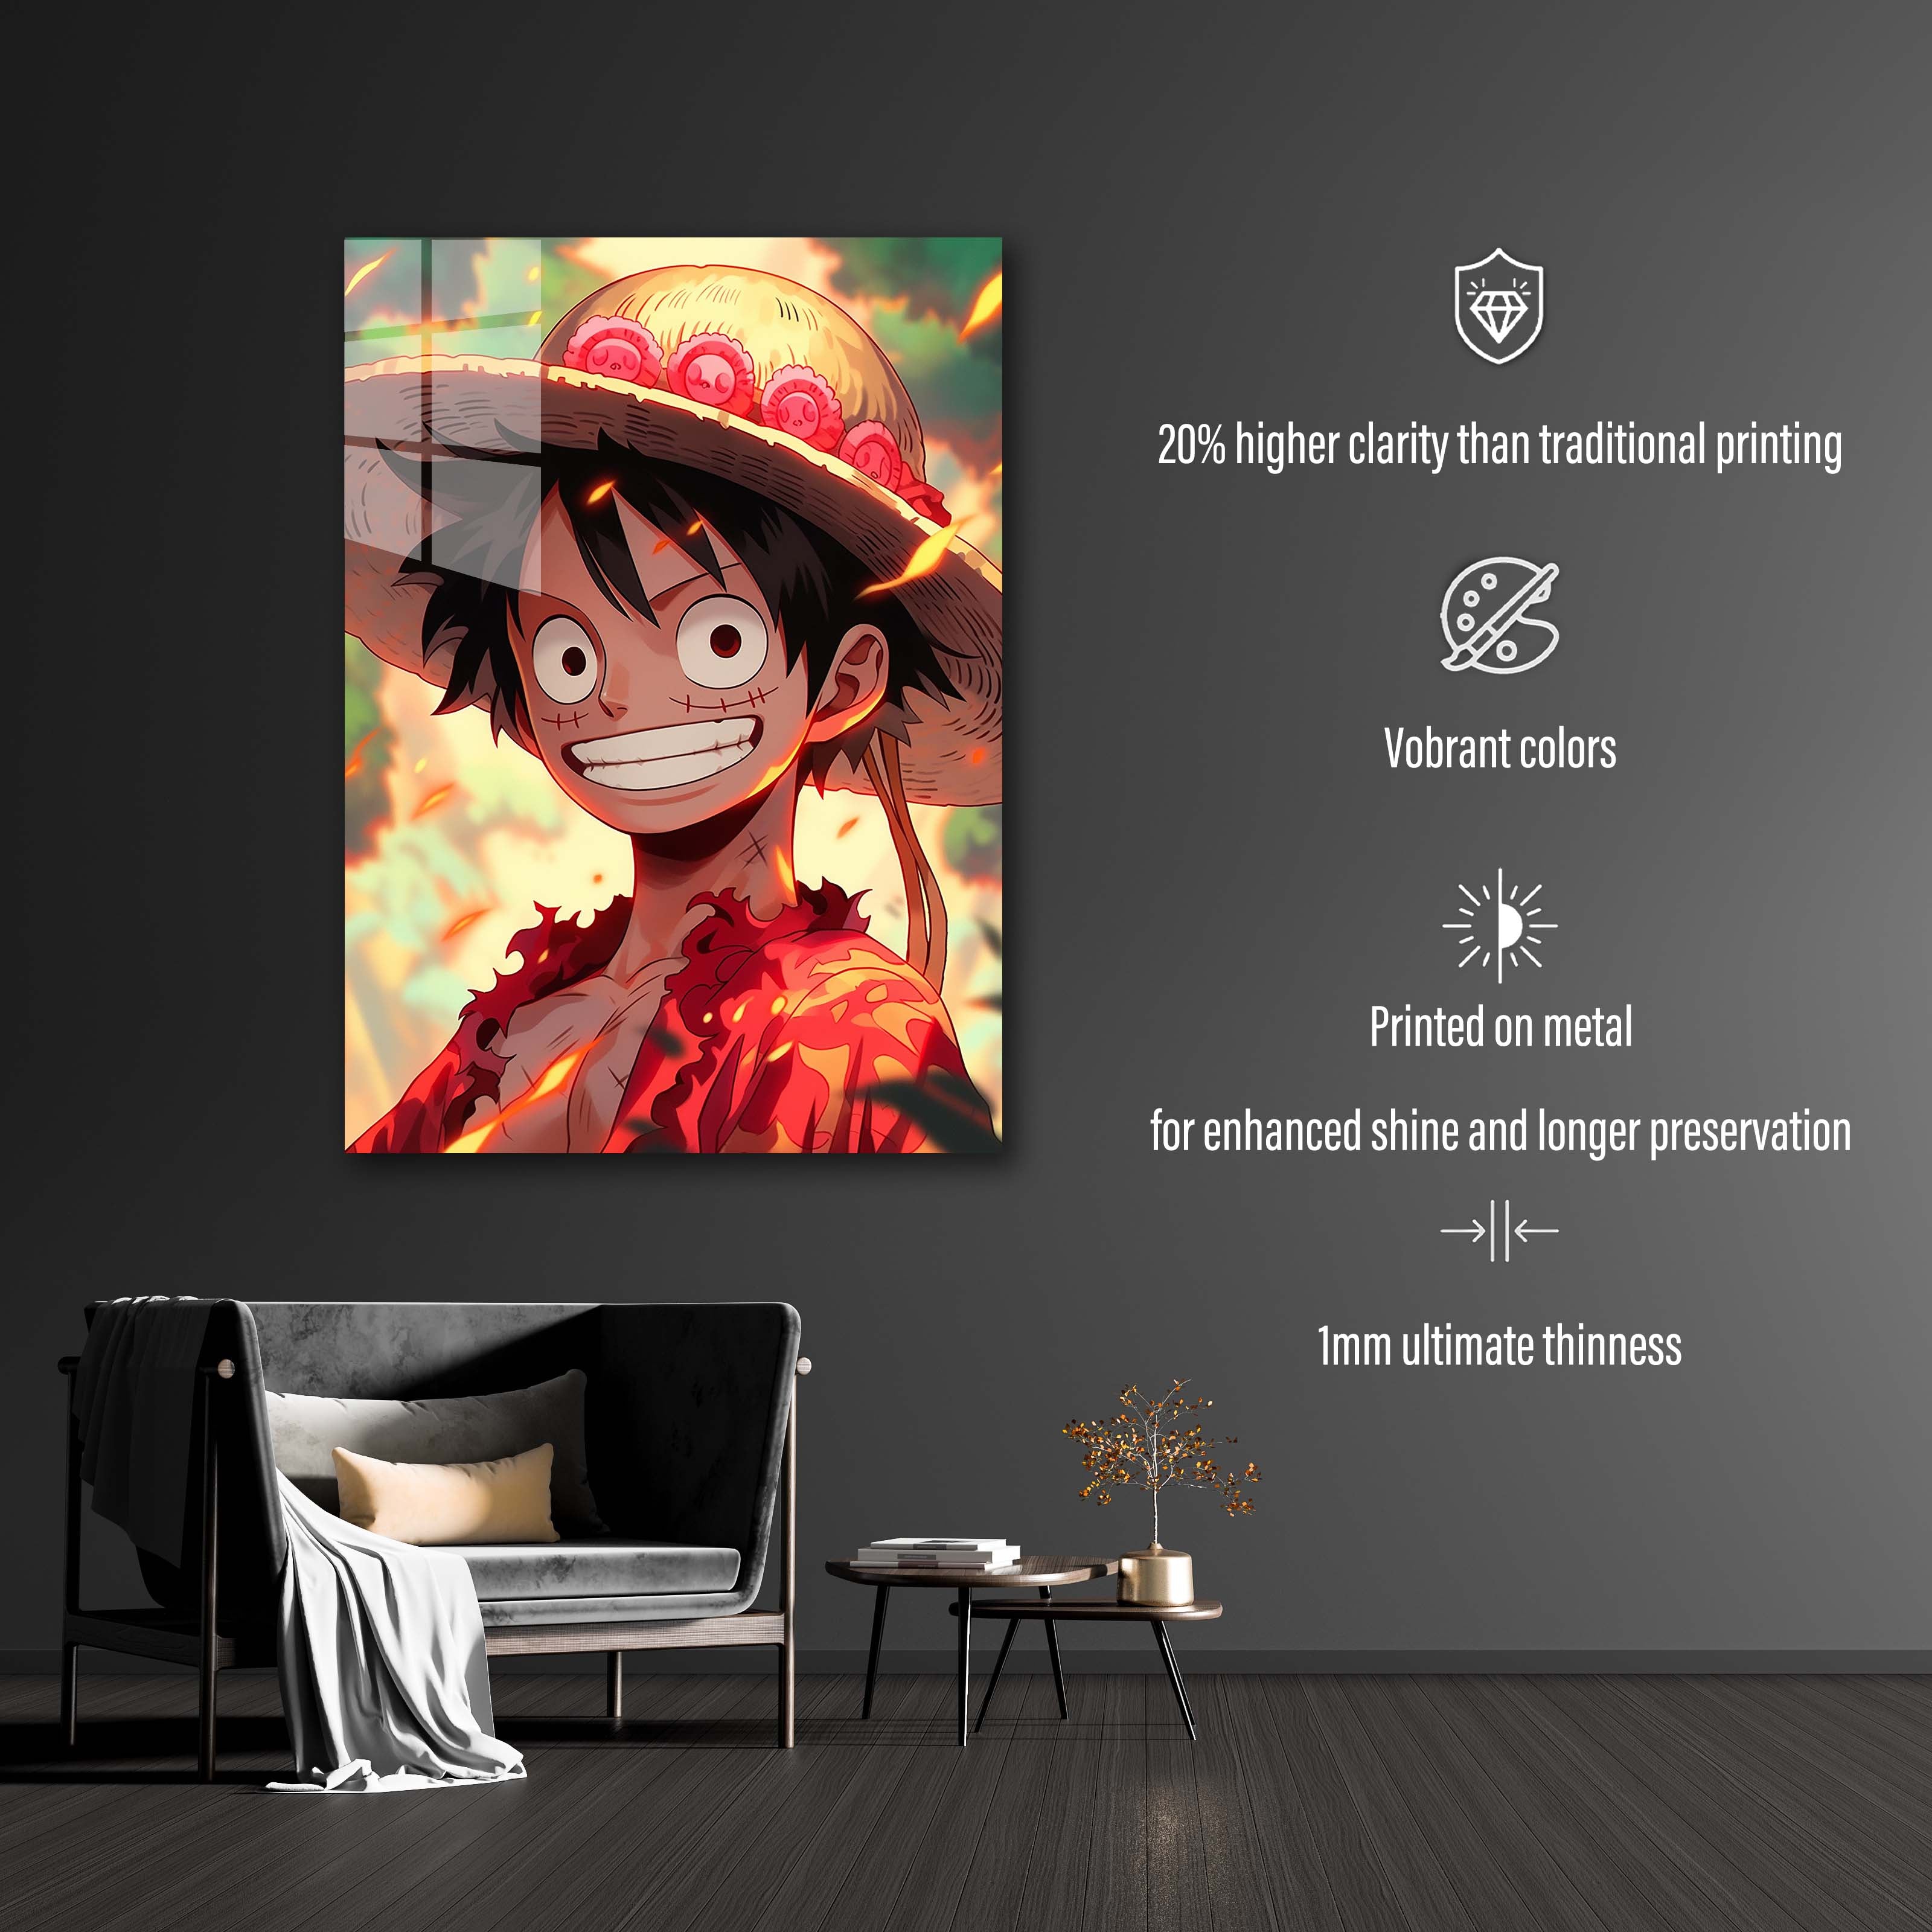 Luffy_2-designed by @ Jikuanime